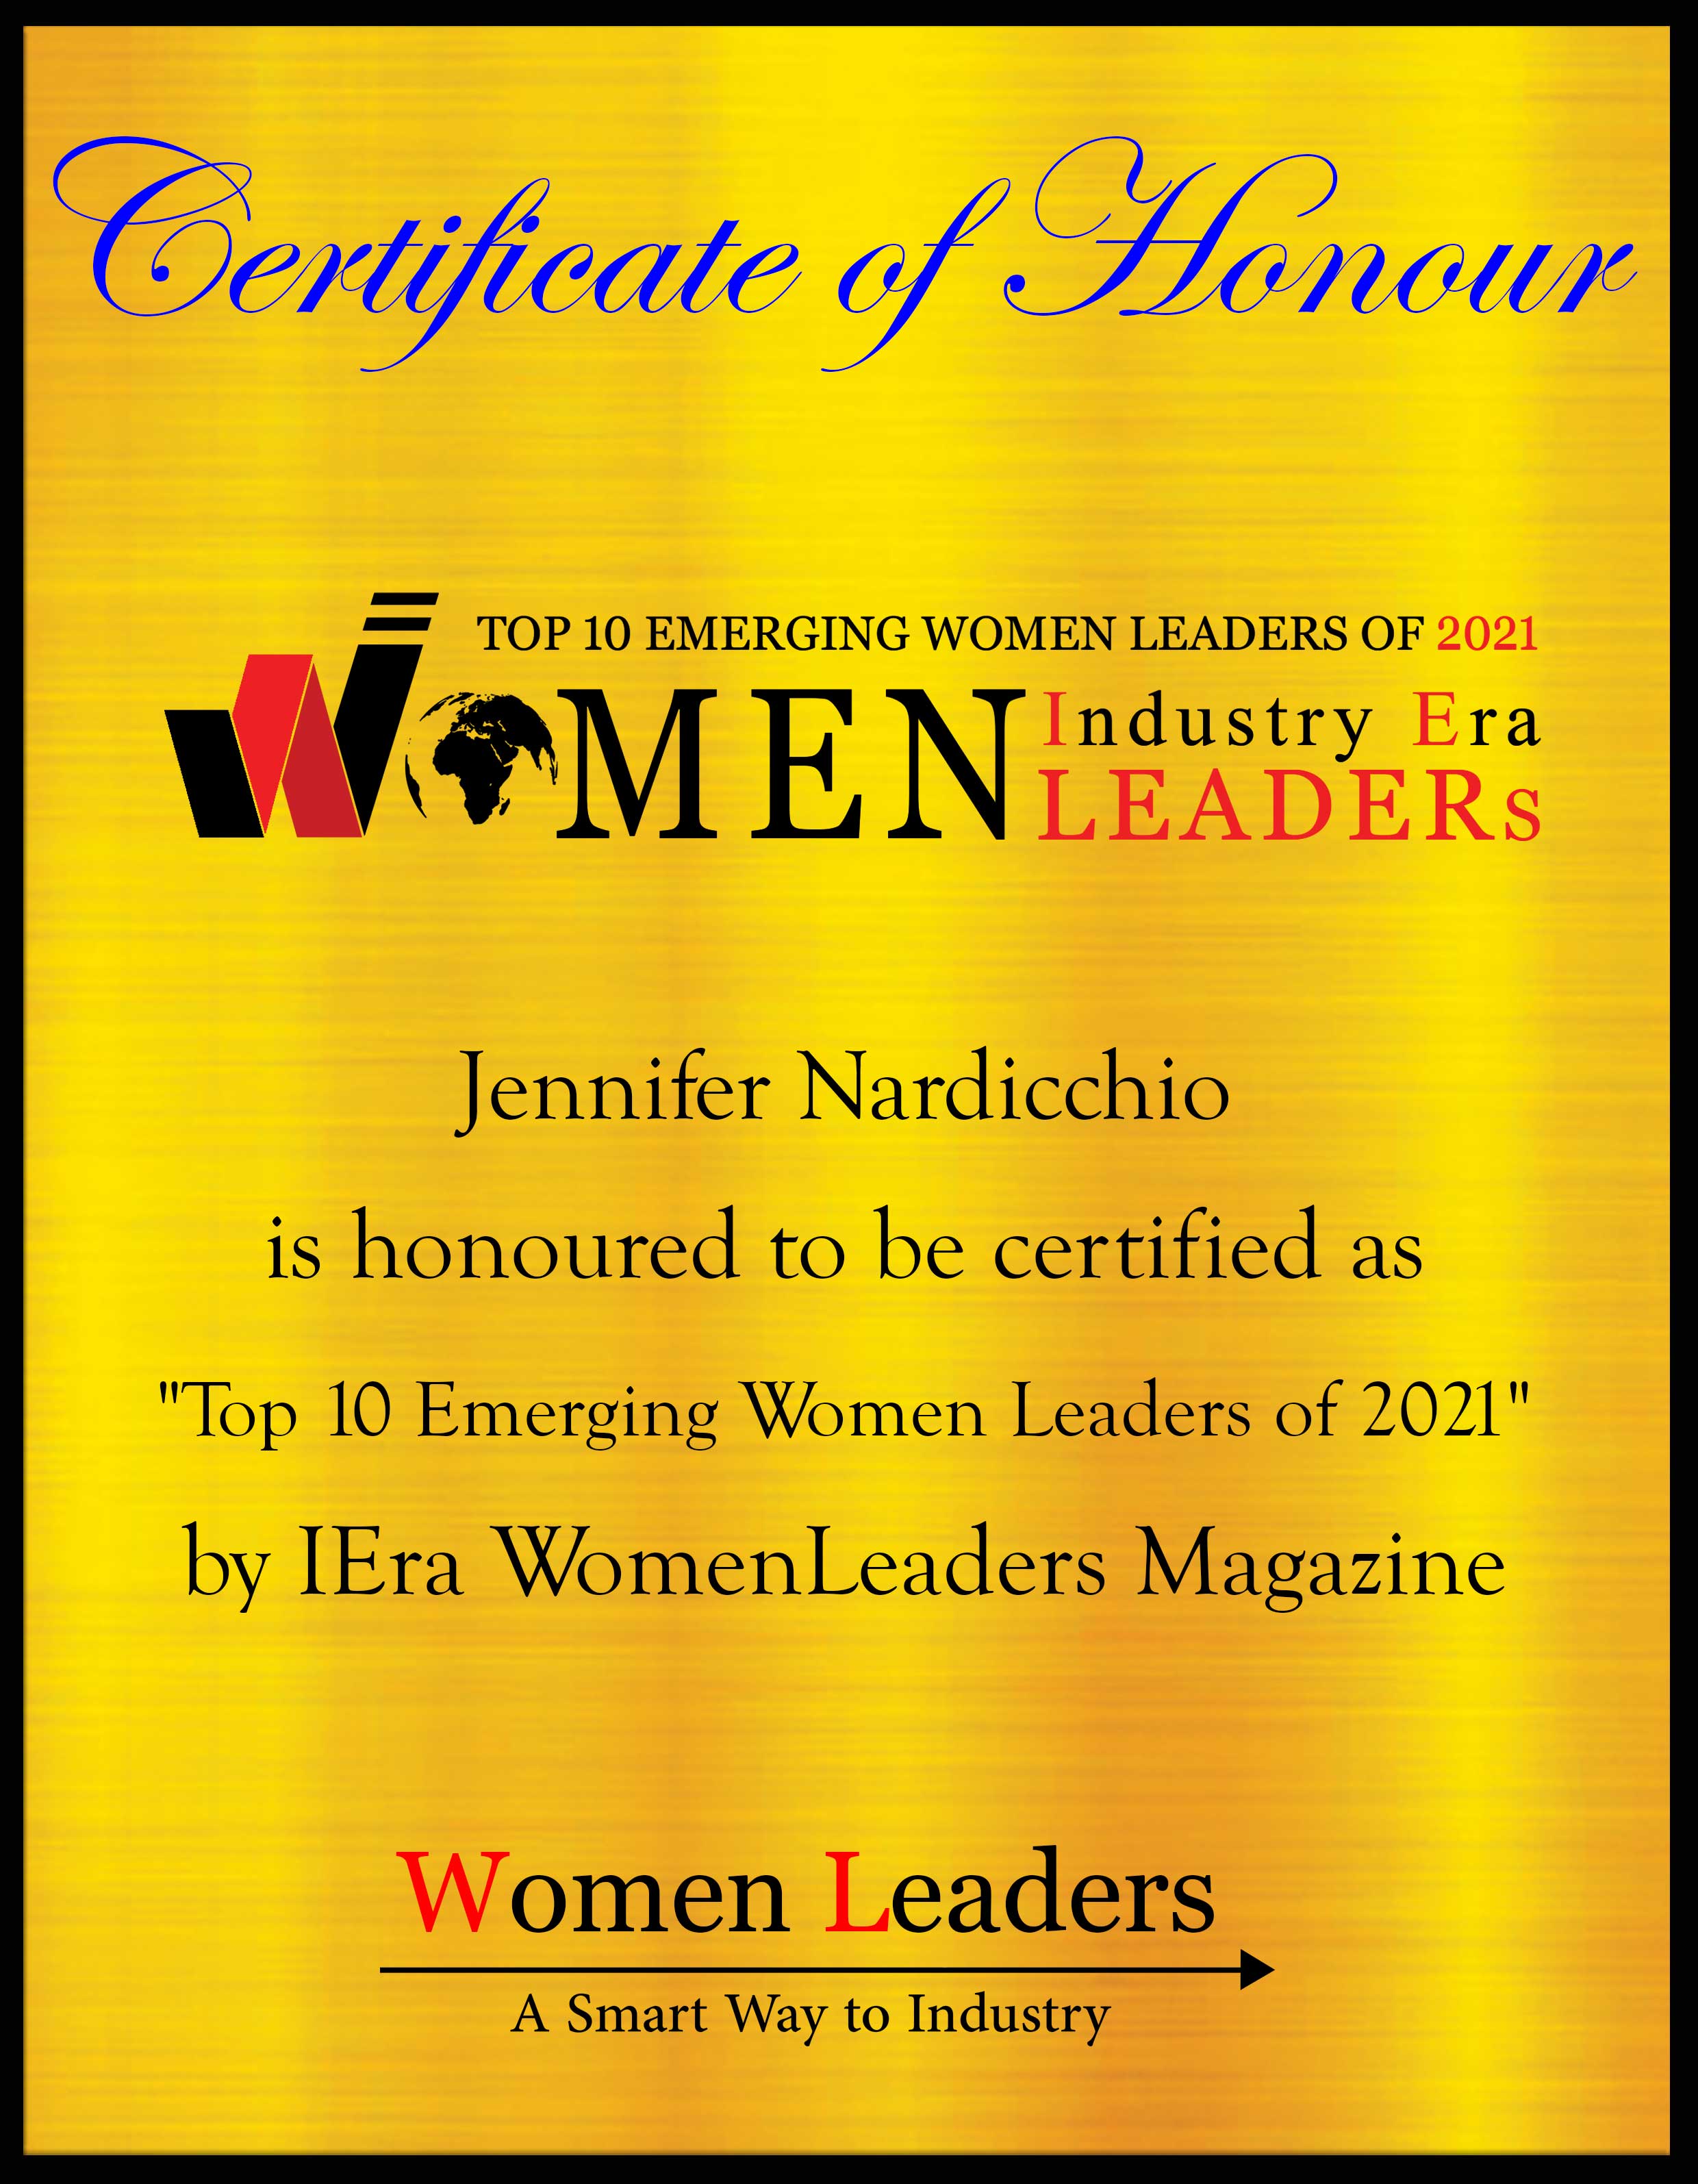 Jennifer Nardicchio, Director of Marketing of Element Materials Technology, Most Empowering Women Leaders of 2021